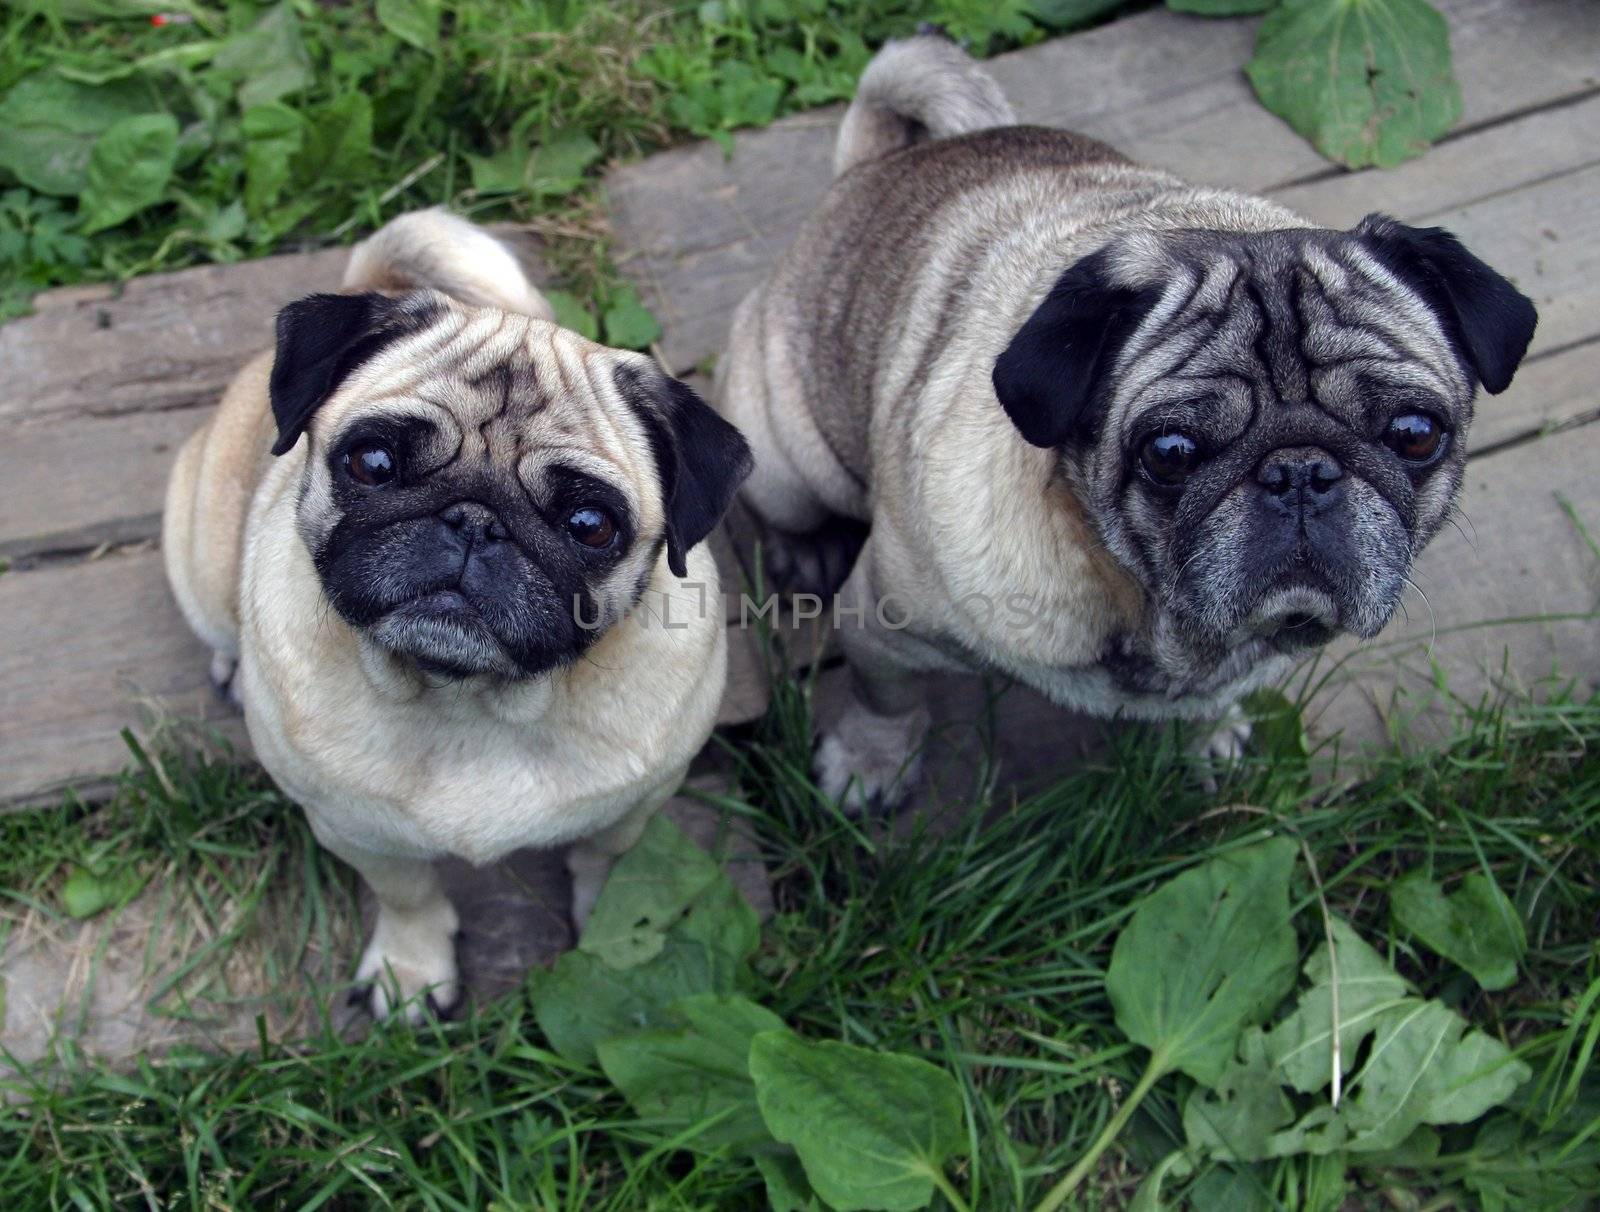 Pugs by friday